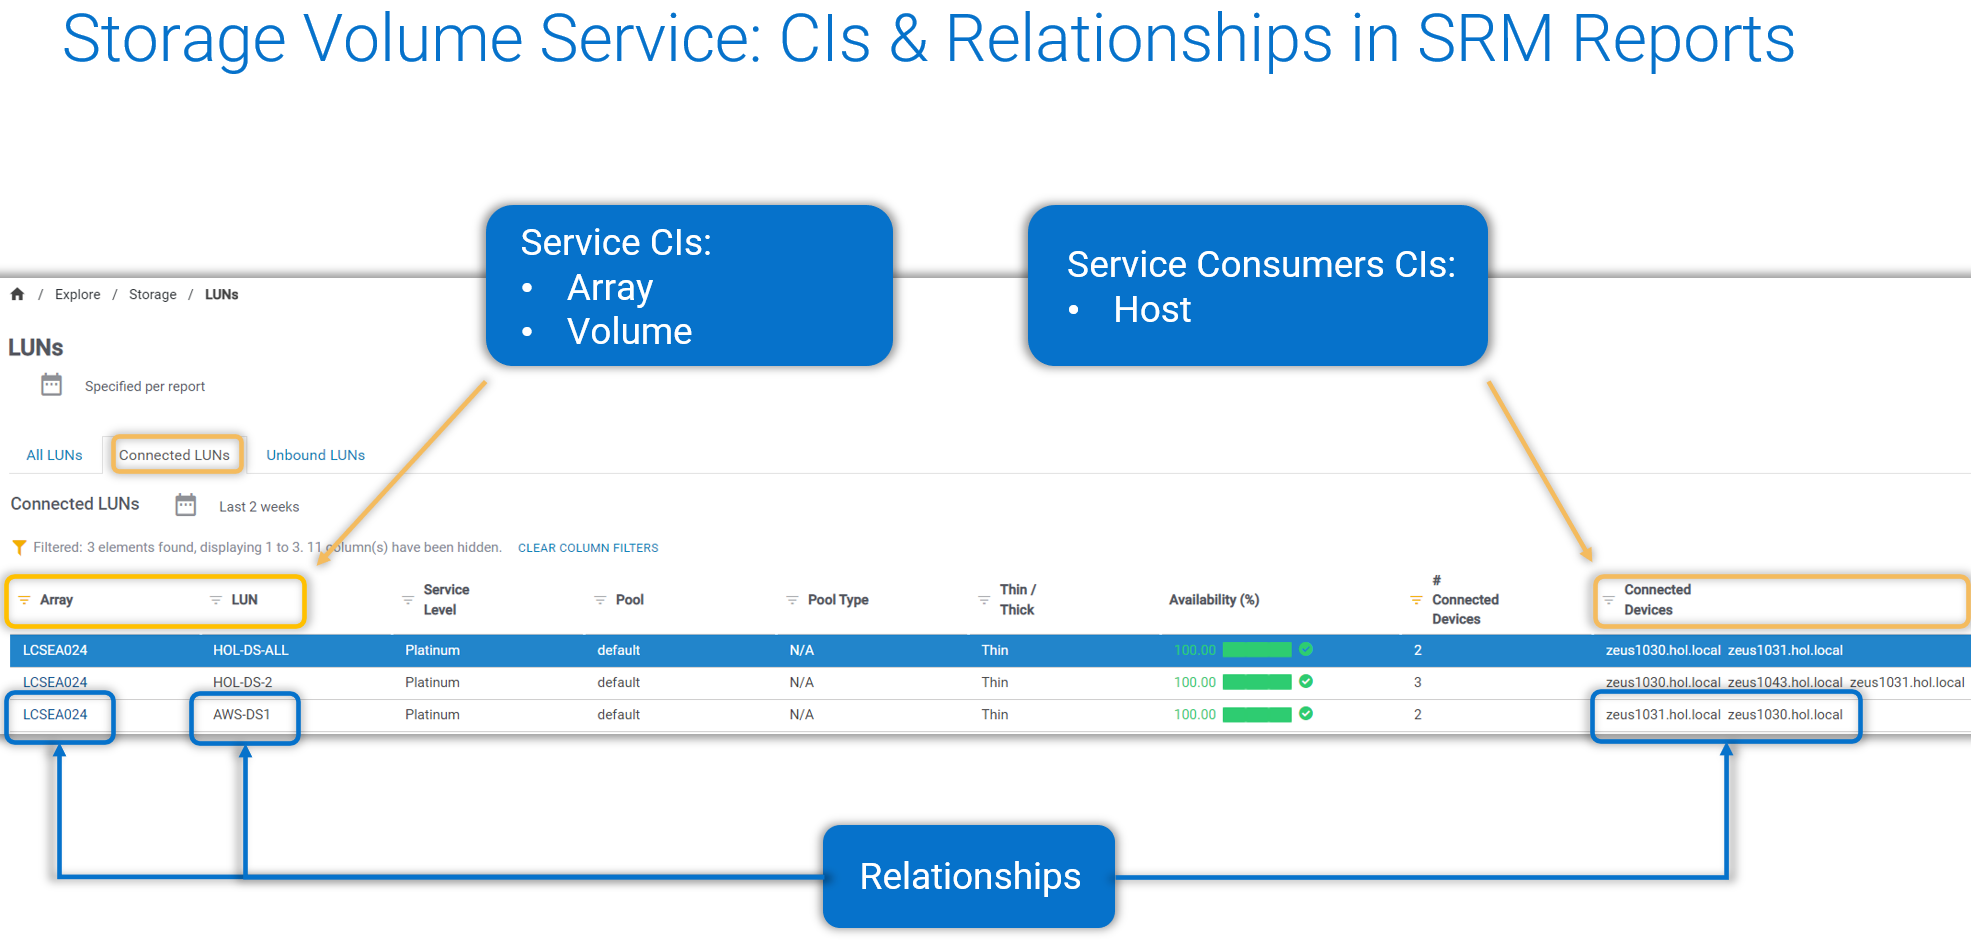 A diagram of the CIs and relationships in SRM reports through the storage volume service. This shows service CIs and Service consumers CIs and the relationships between them.